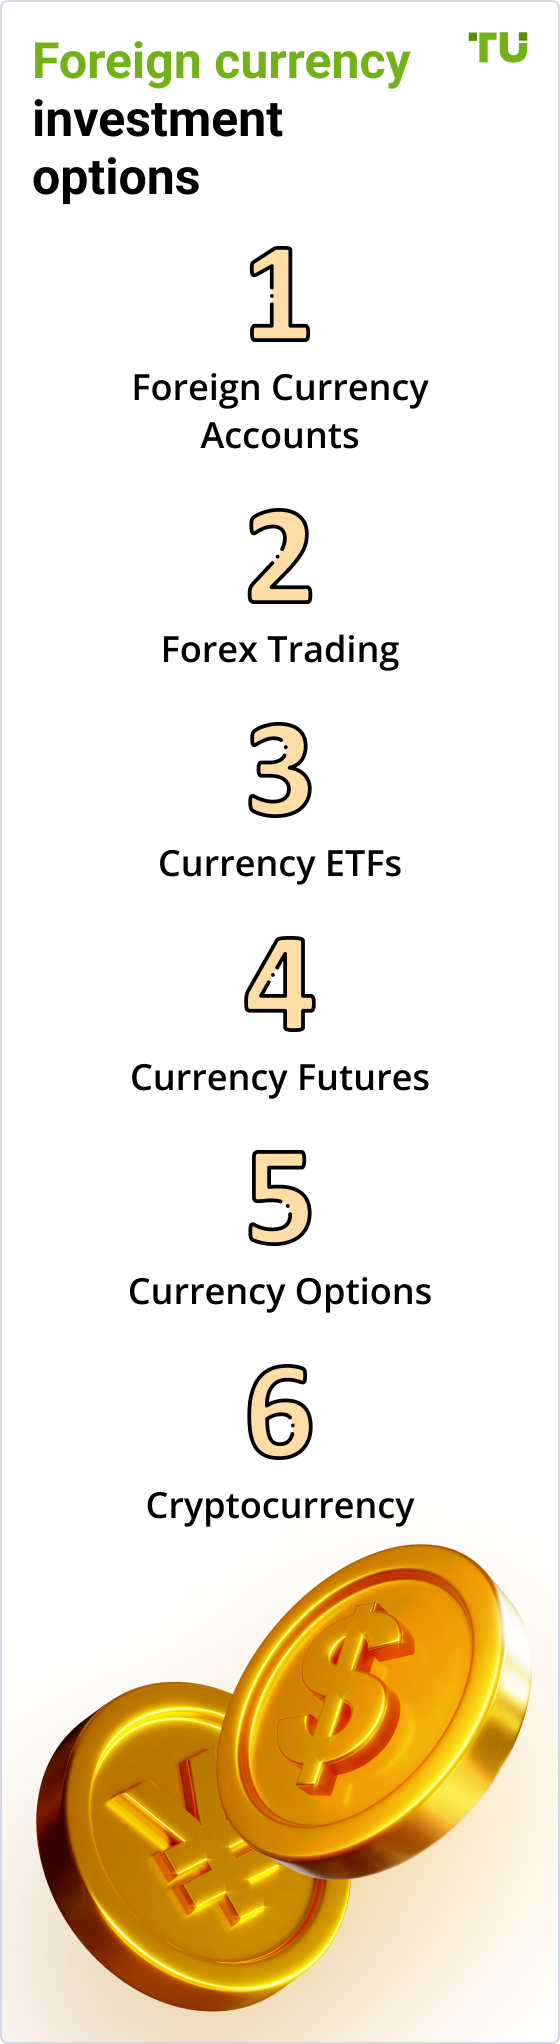 Foreign currency investment options